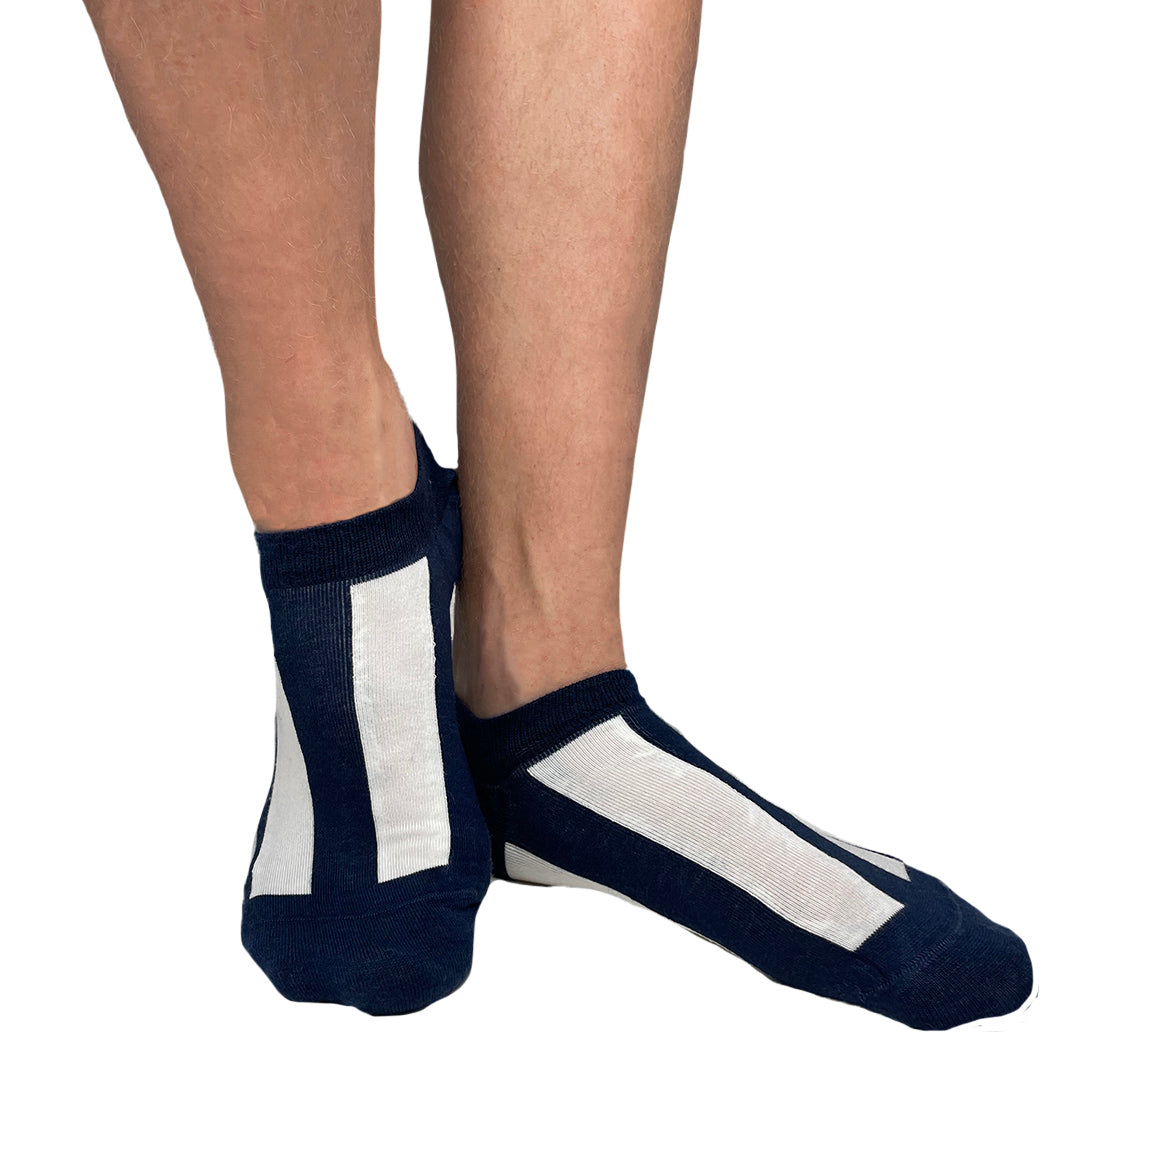 Sneaker socks with Blue and white vertical stripes